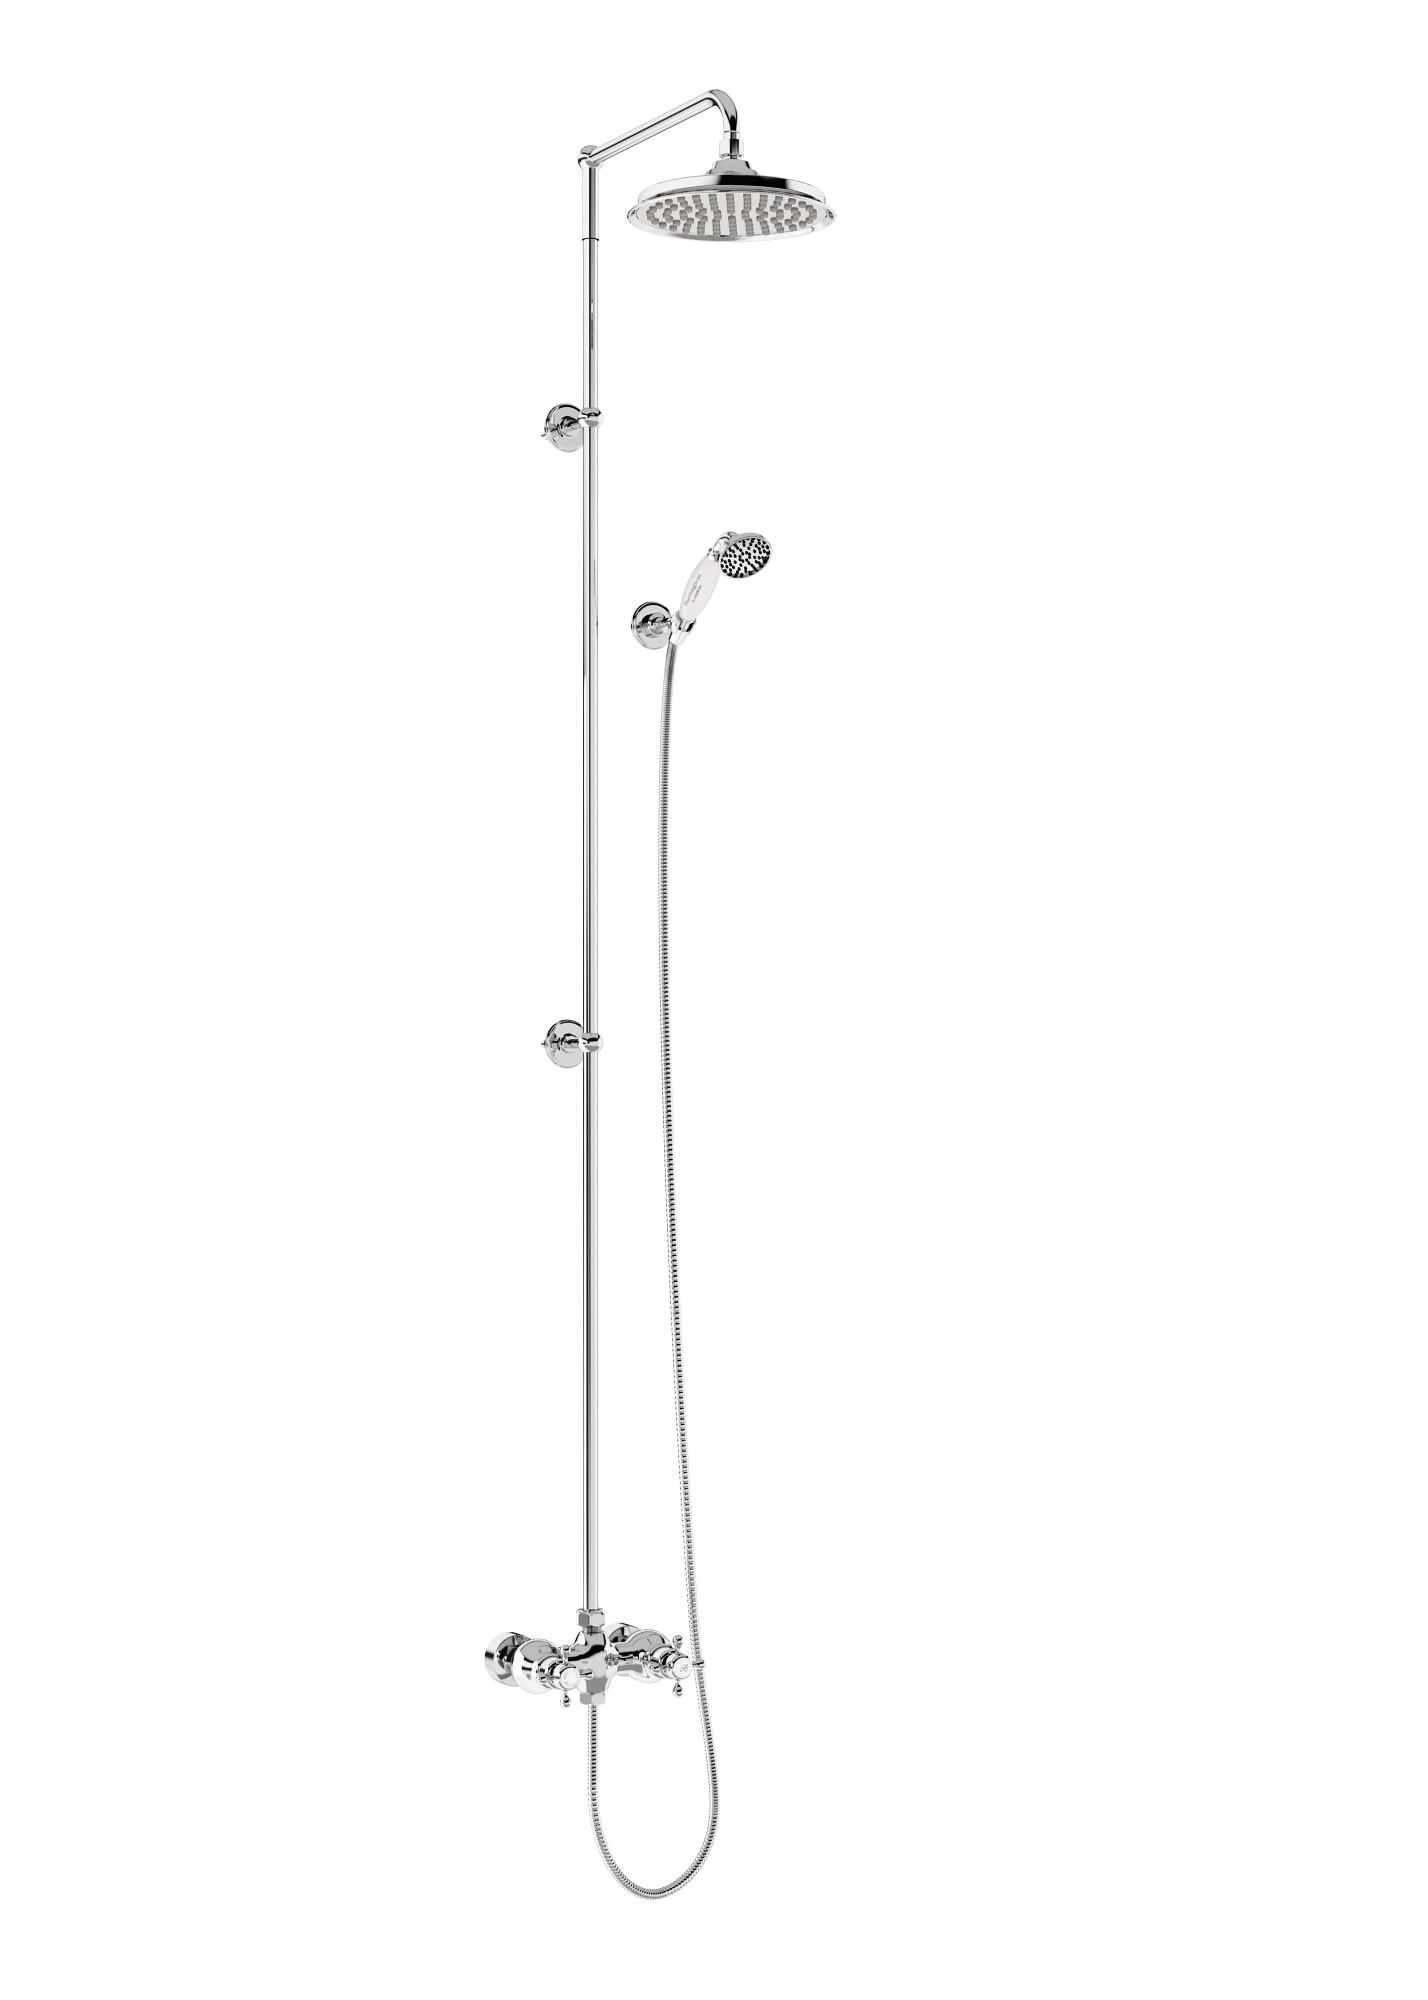 Eden Thermostatic Exposed Shower Bar Valve Single Outlet with Extended Rigid Riser and Swivel Shower Arm with 9 inch rose